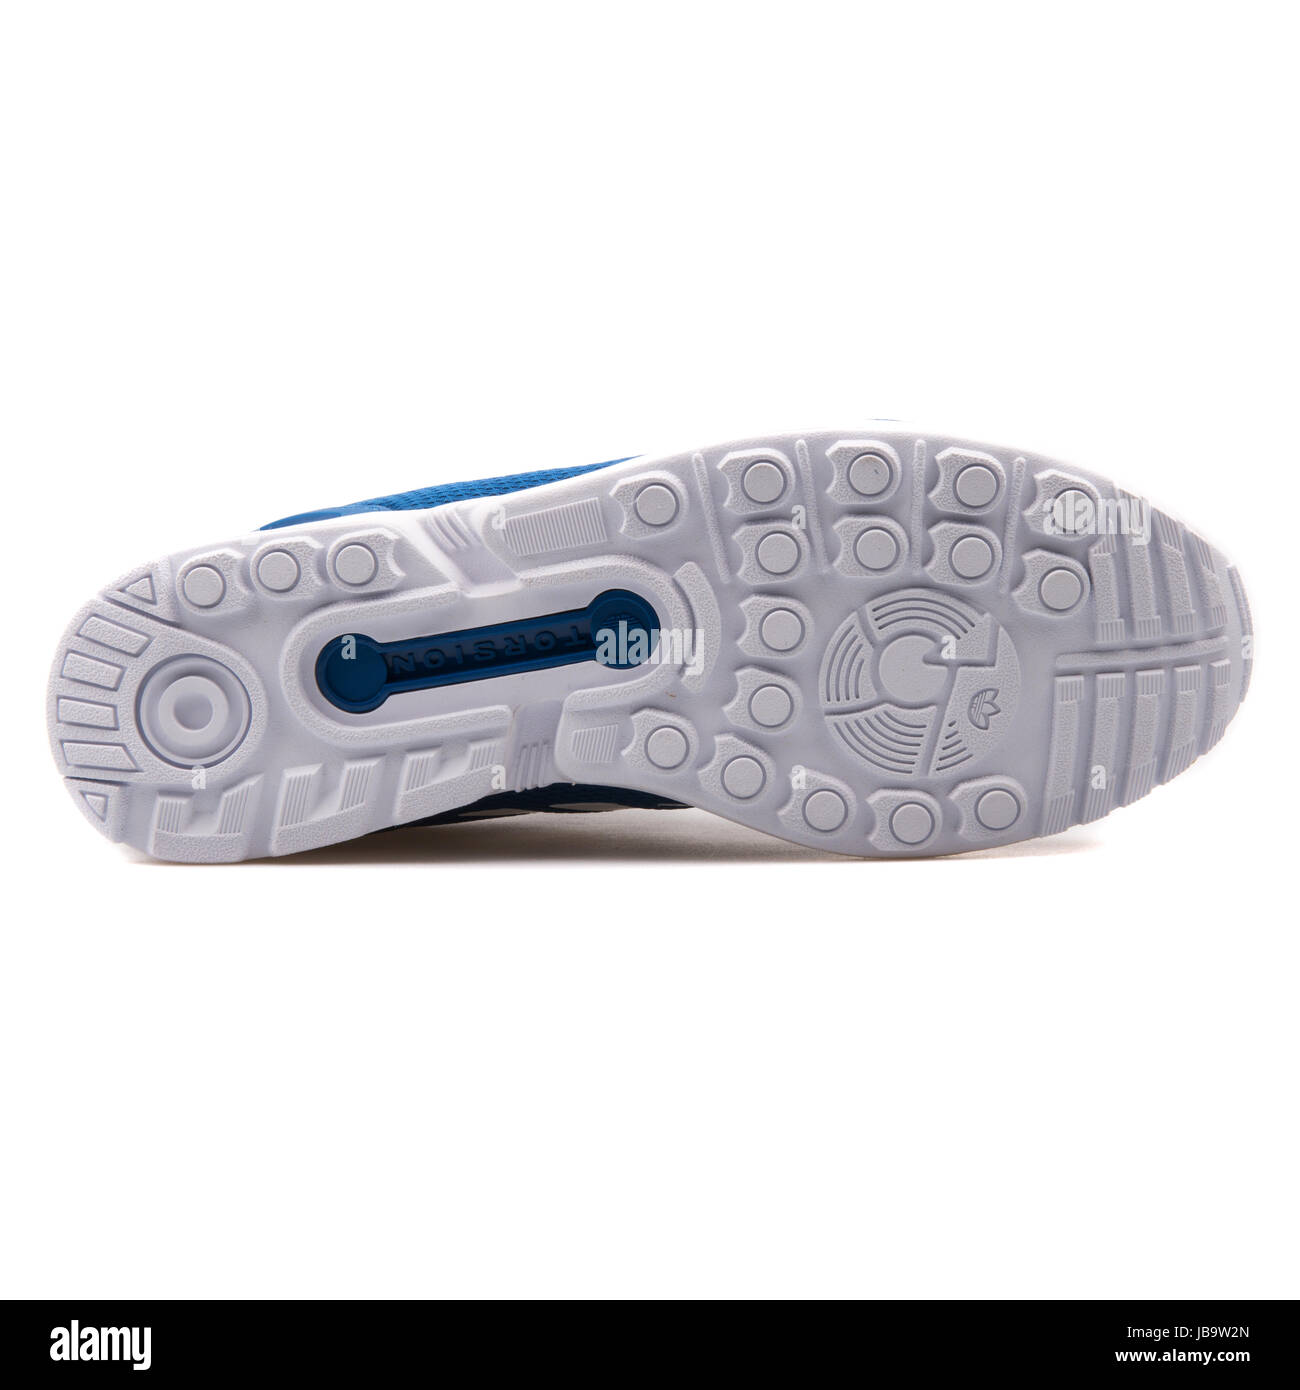 Adidas ZX Flux Blue Men's Running Shoes - AF6344 Stock Photo - Alamy